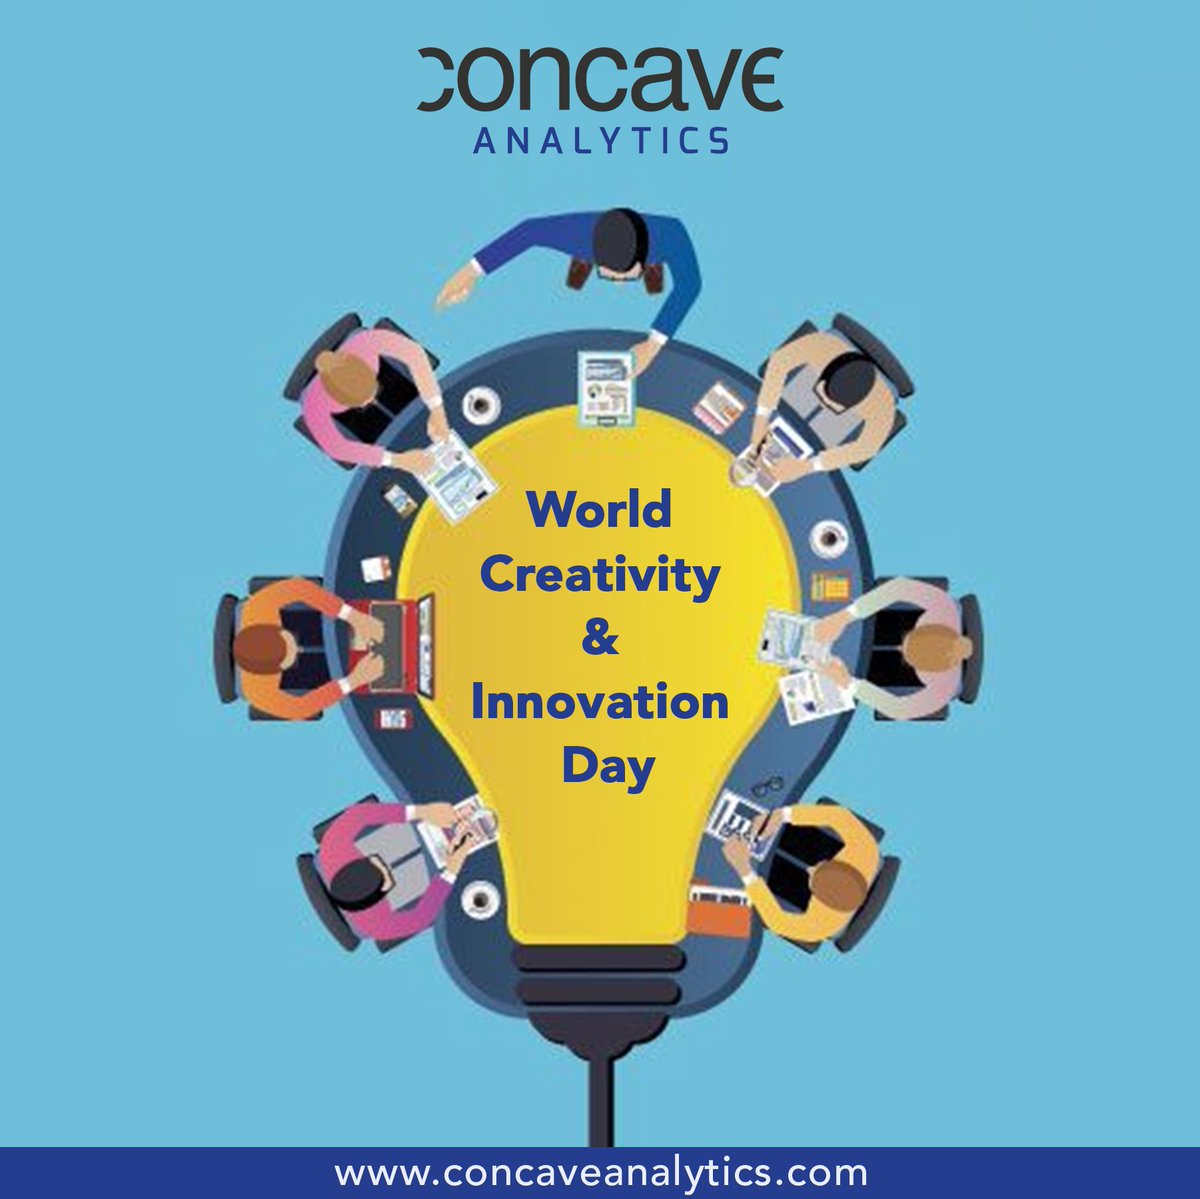 Unleash your creativity and embrace innovation! Today, we celebrate World Creativity and Innovation Day, a reminder to explore new ideas, unleash imagination, and drive positive change in every field. 

#ConcaveAnalytics #CreativityAndInnovation #UnleashThePossible